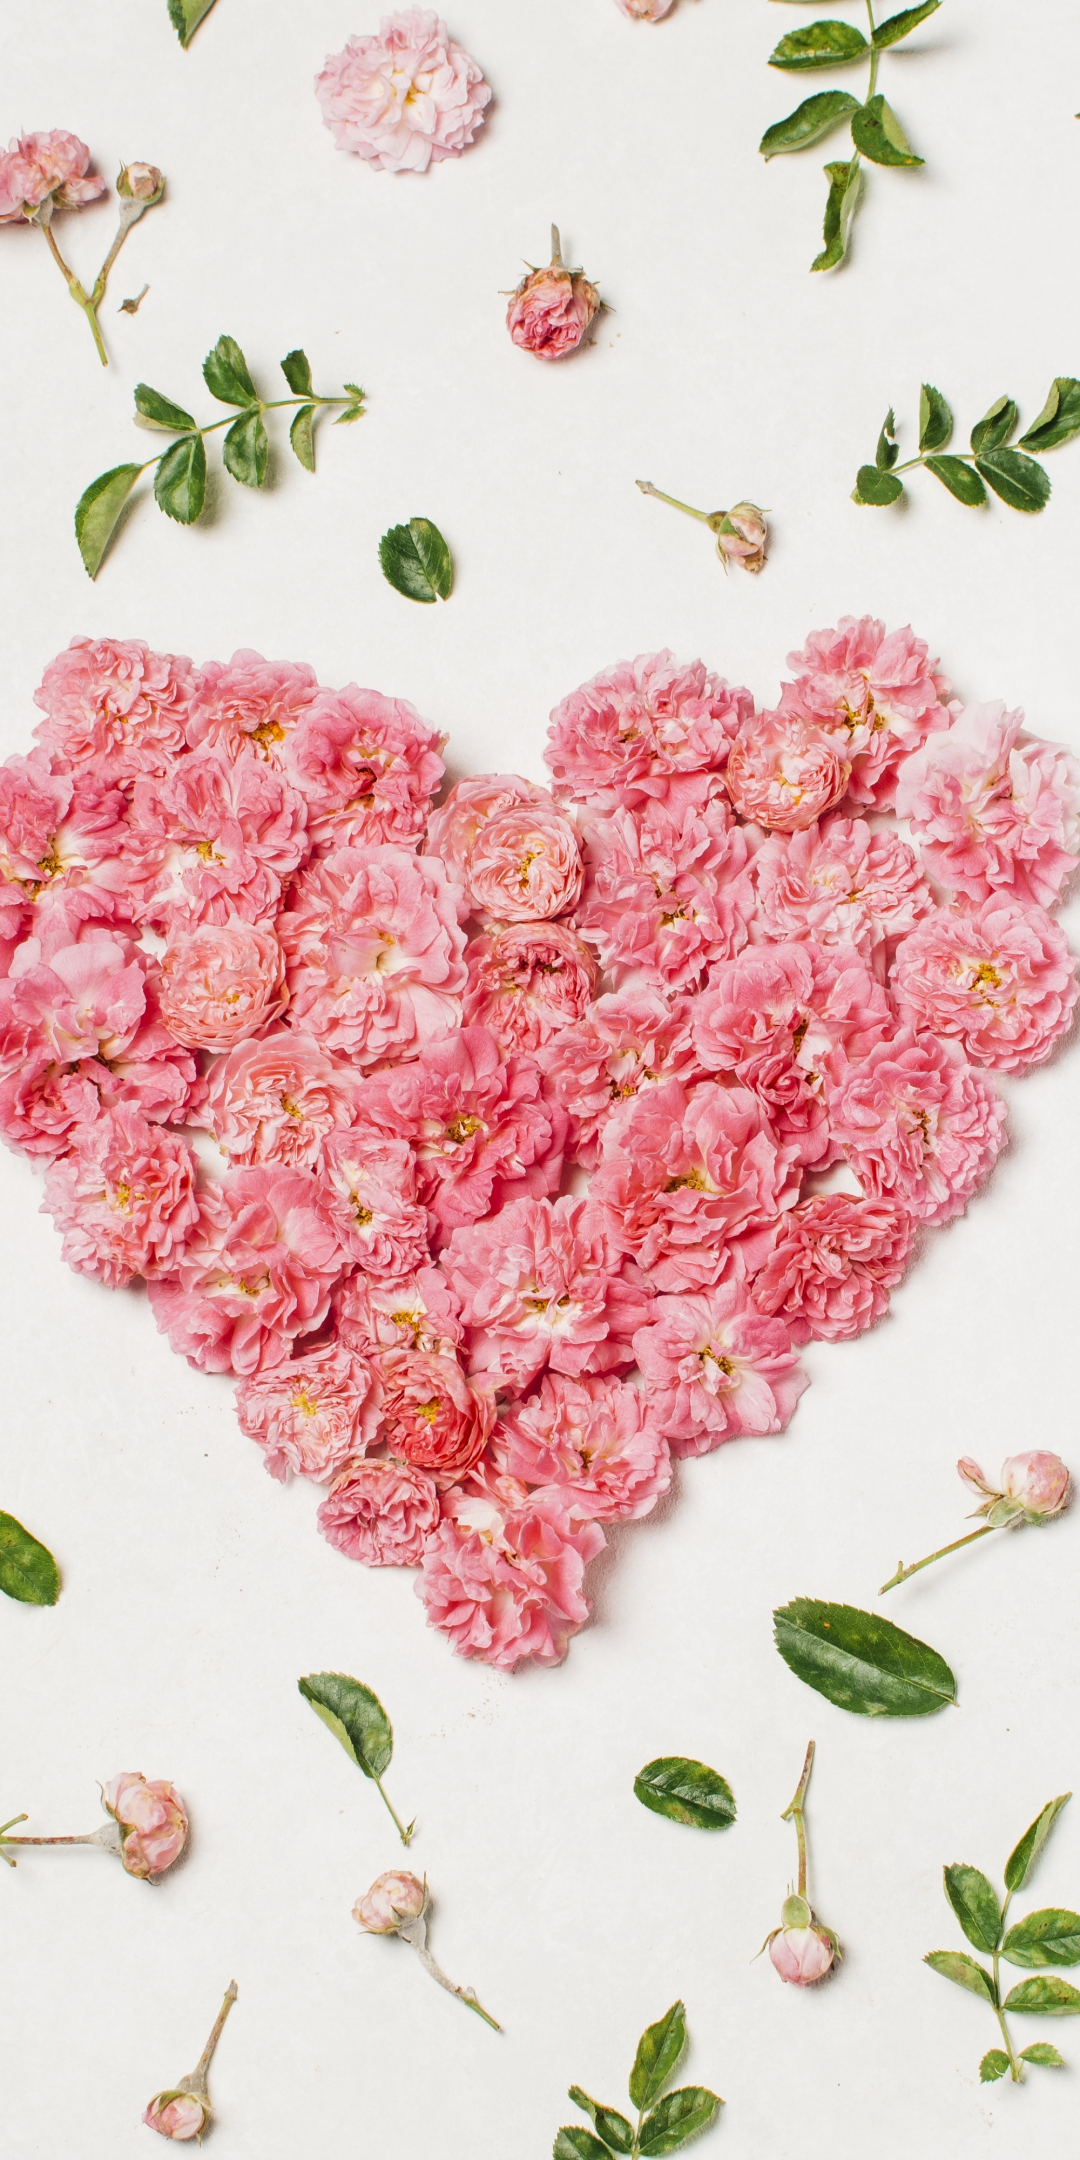 Download 1080x2160 wallpaper heart, pink flowers, leaves, honor 7x